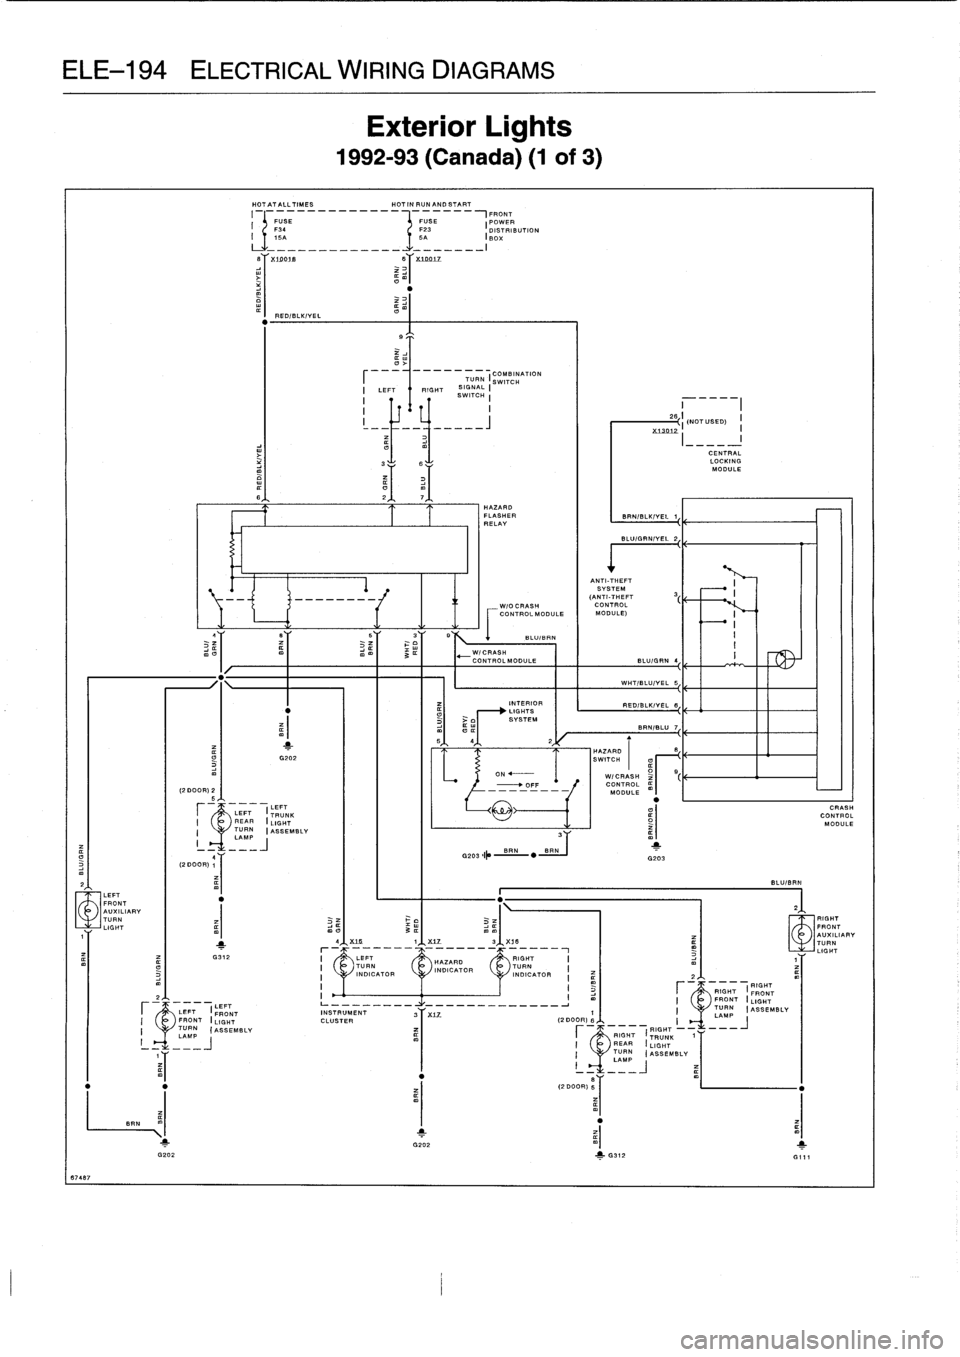 BMW M3 1993 E36 Service Manual 
ELE-194
ELECTRICAL
WIRING
DIAGRAMS

6707

LEFT
FRONT
AUXILIARY
TURN
LIGHT

BE
.

LEFT
LEFT
(FRONT
FRONT
I
LIGHT
TURN
(ASSEMBLY
=
M
=J

1
G312

HOTATALLTIMES

	

HOTINRUNANDSTART
--------------
FUSE
I